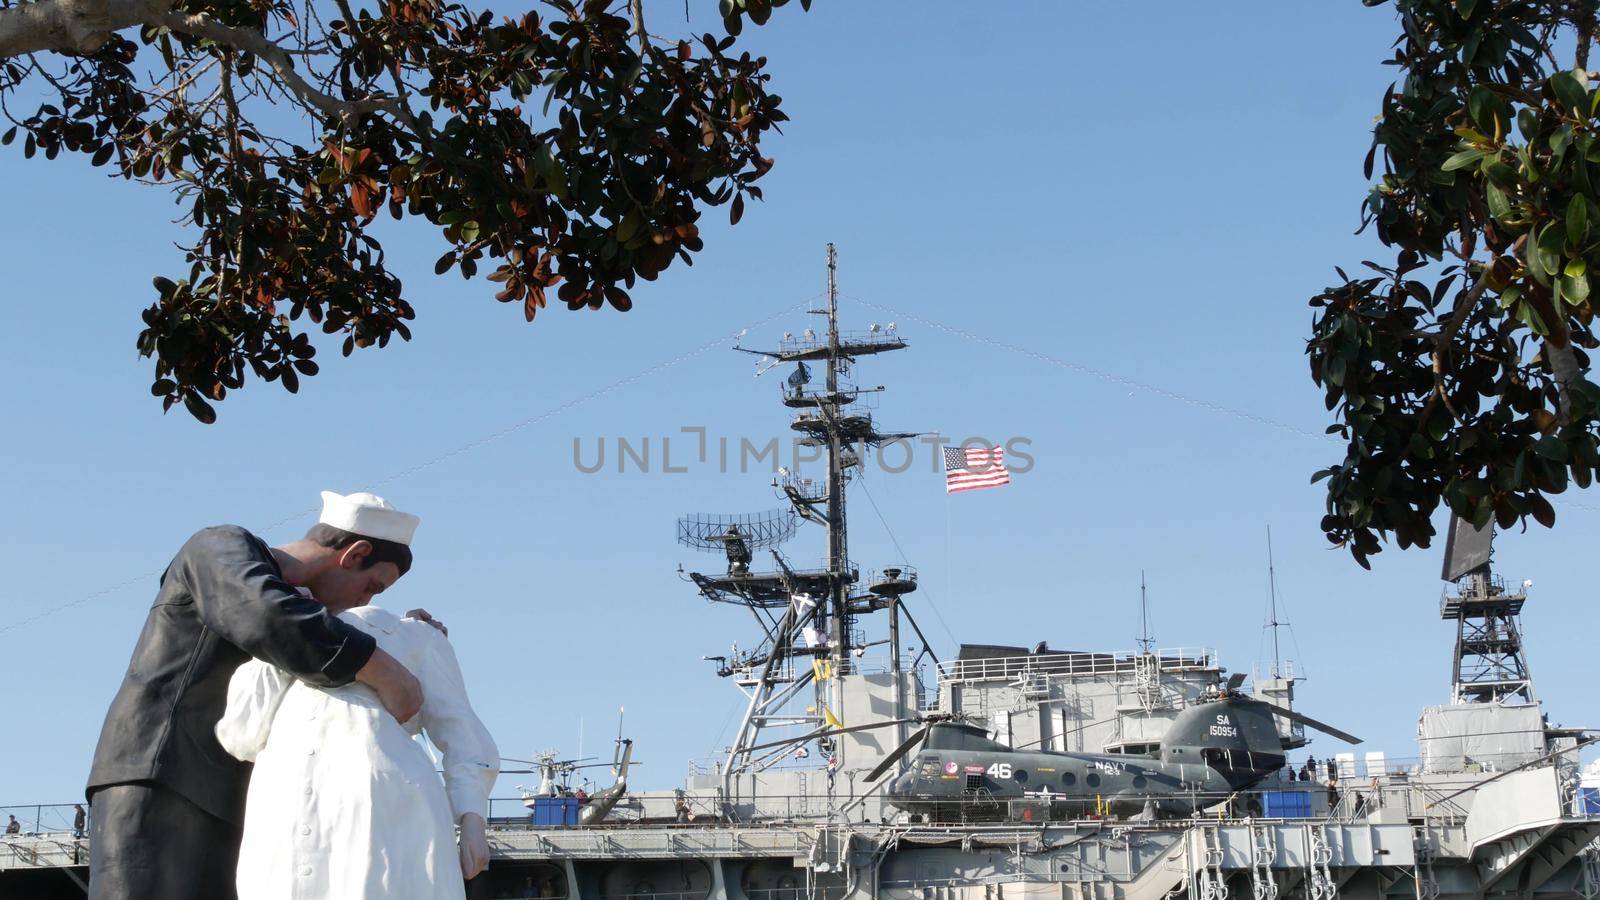 SAN DIEGO, CALIFORNIA USA - 23 FEB 2020: Unconditional Surrender Statue, USS Midway Museum. Symbol of navy fleet and Victory over Japan Day. Sailor kissing a woman, World War II memorial sculpture.